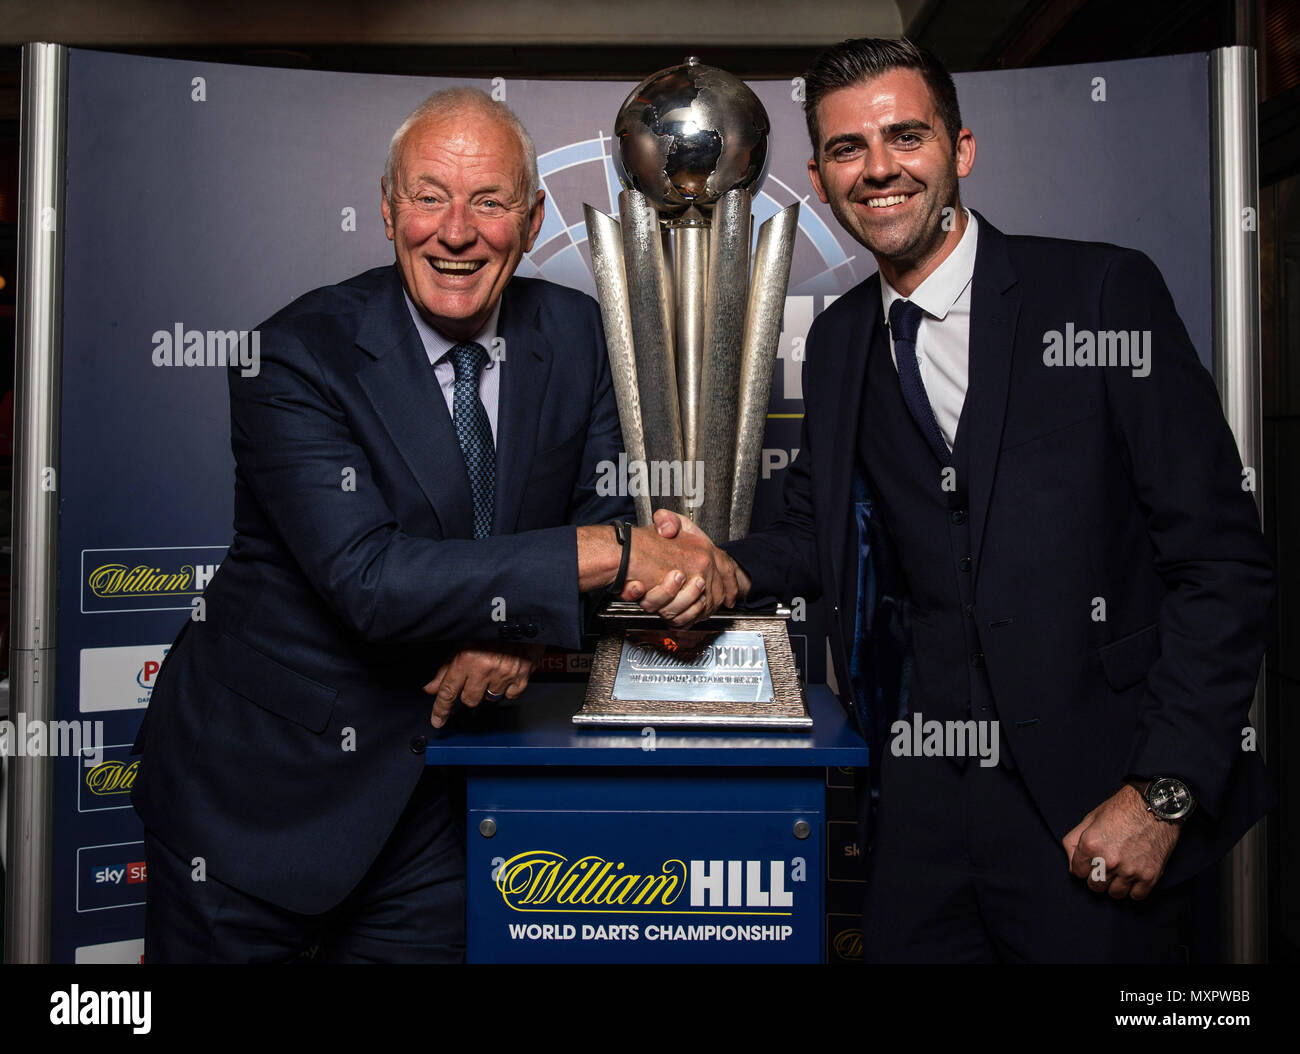 Chairman of Matchroom Sport Barry Hearn (left) and William Hill head of sponsorship and retail marketing Liam McKee pose during the photocall at Smith & Wollensky Restaurant, London. PRESS ASSOCIATION Photo. Picture date: Monday June 4, 2018. See PA story DARTS London. Photo credit should read: Steven Paston/PA Wire Stock Photo